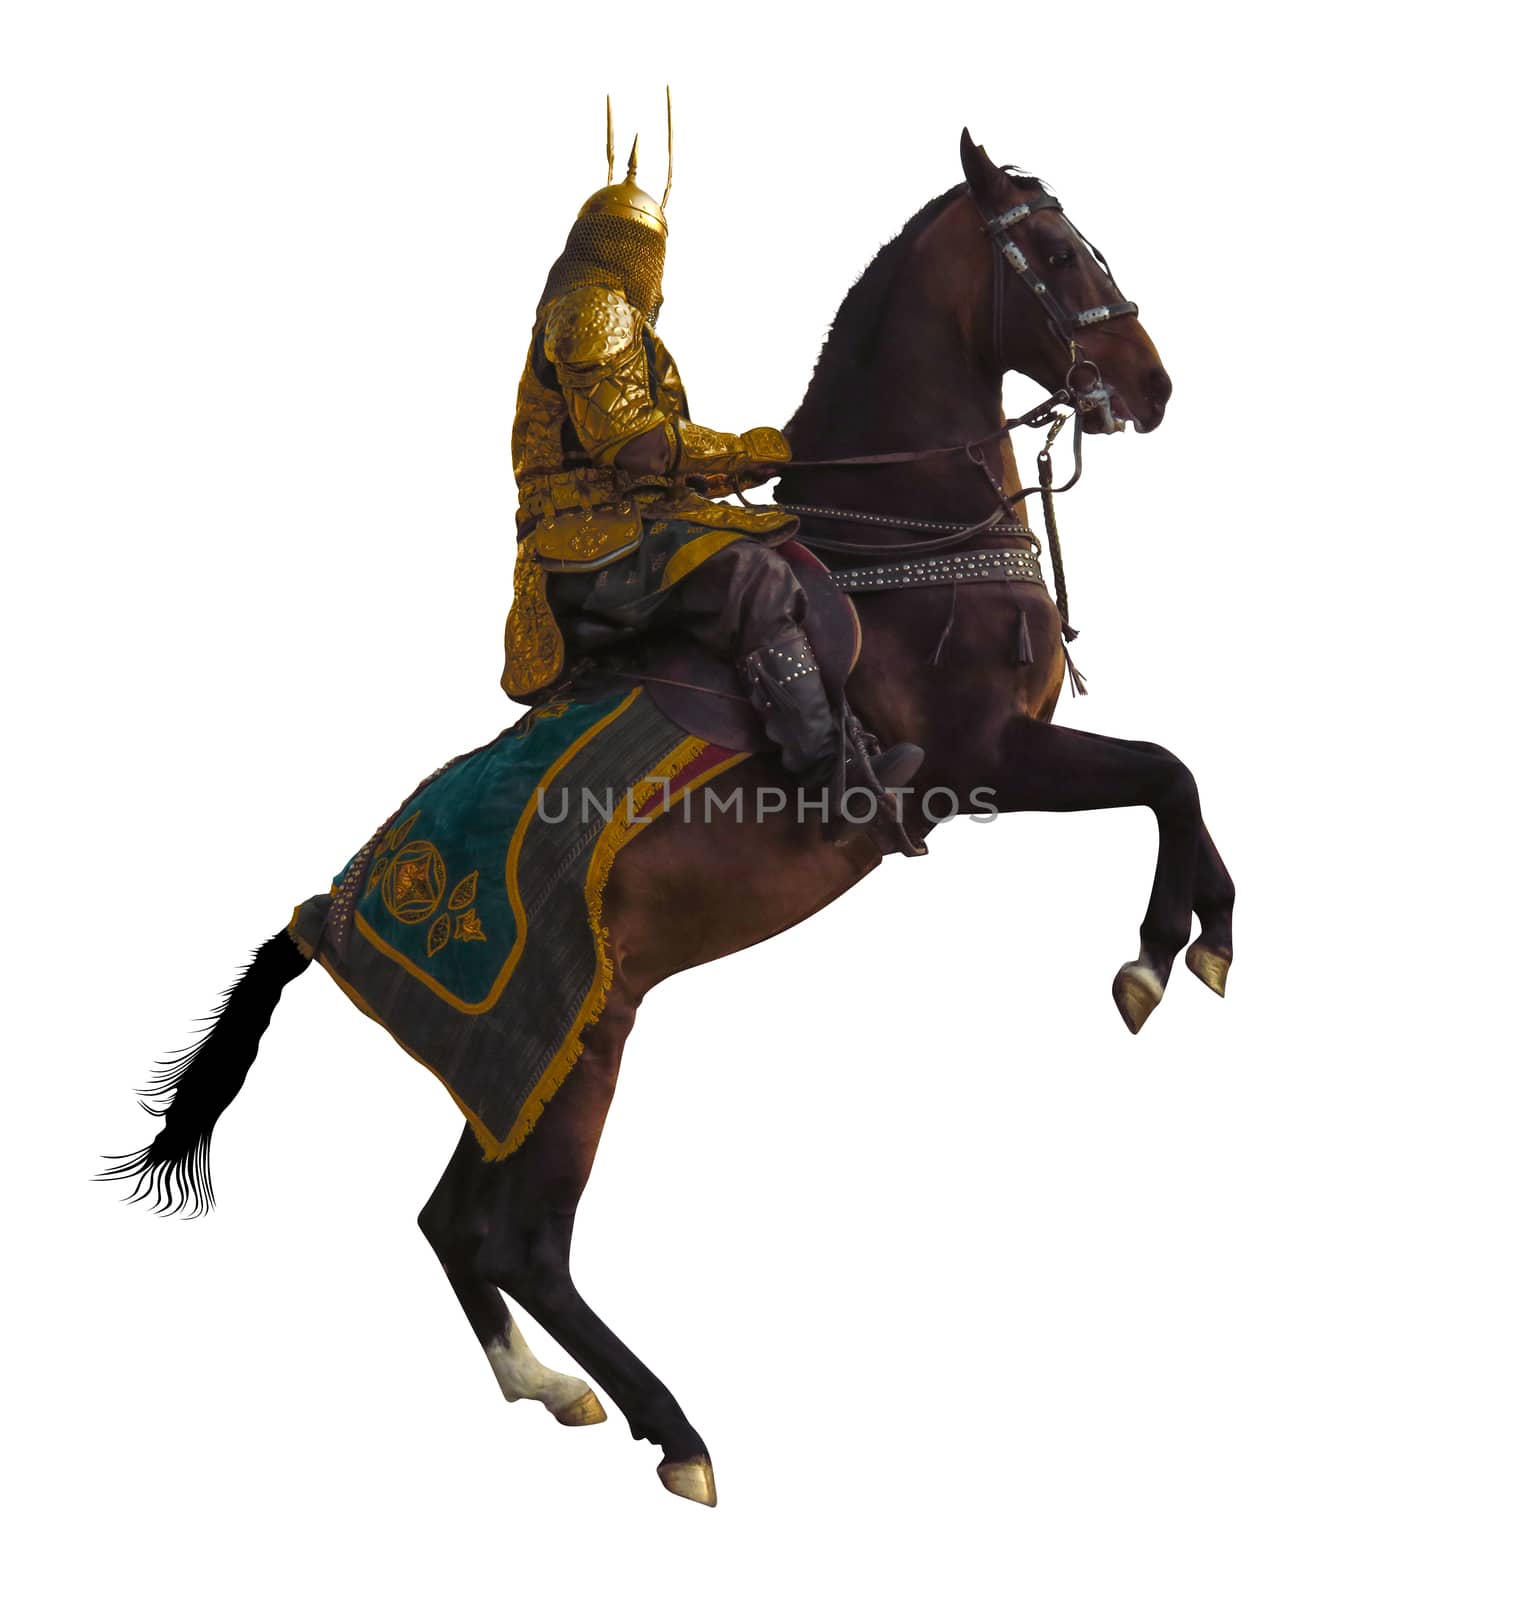 Kazakh horse rider in a national costume on the horse isolated on white background. Clipping Path included.